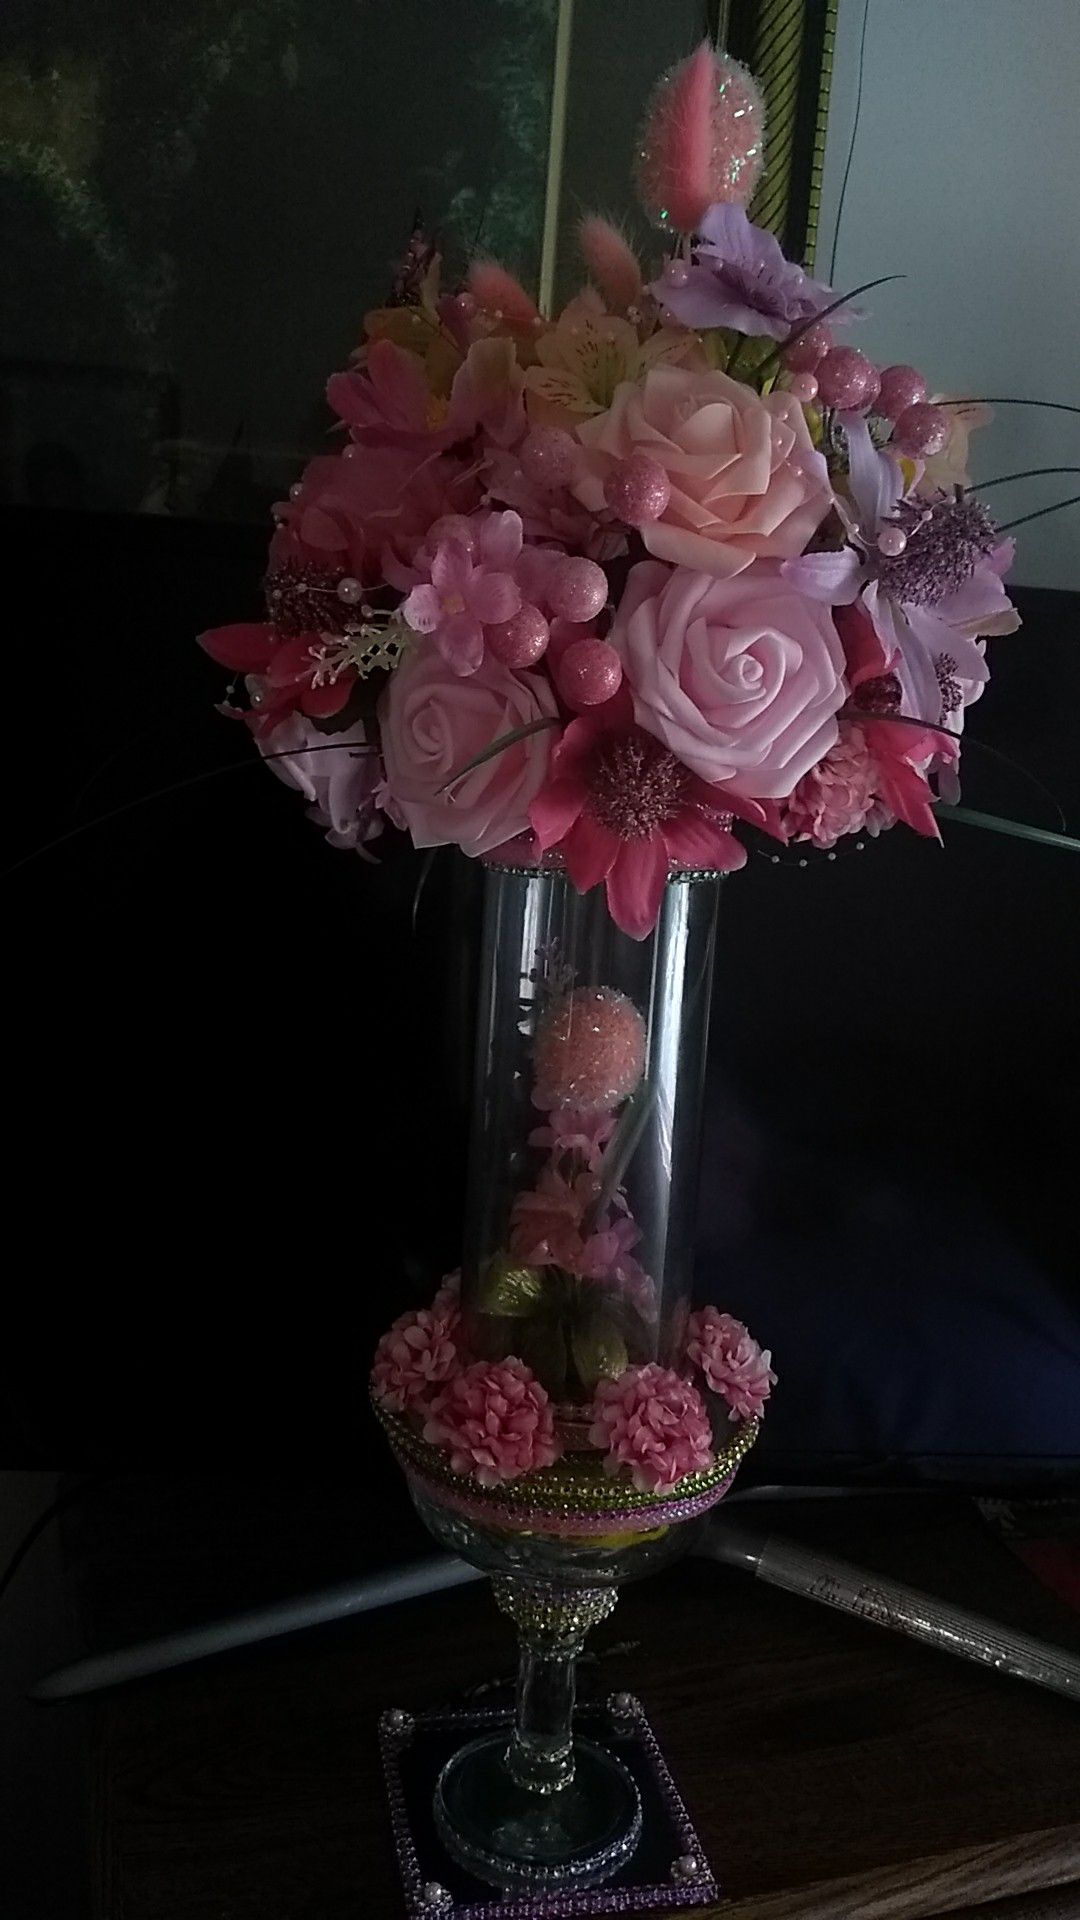 Vase made by hand, made of glass, flowers and rhinestones.